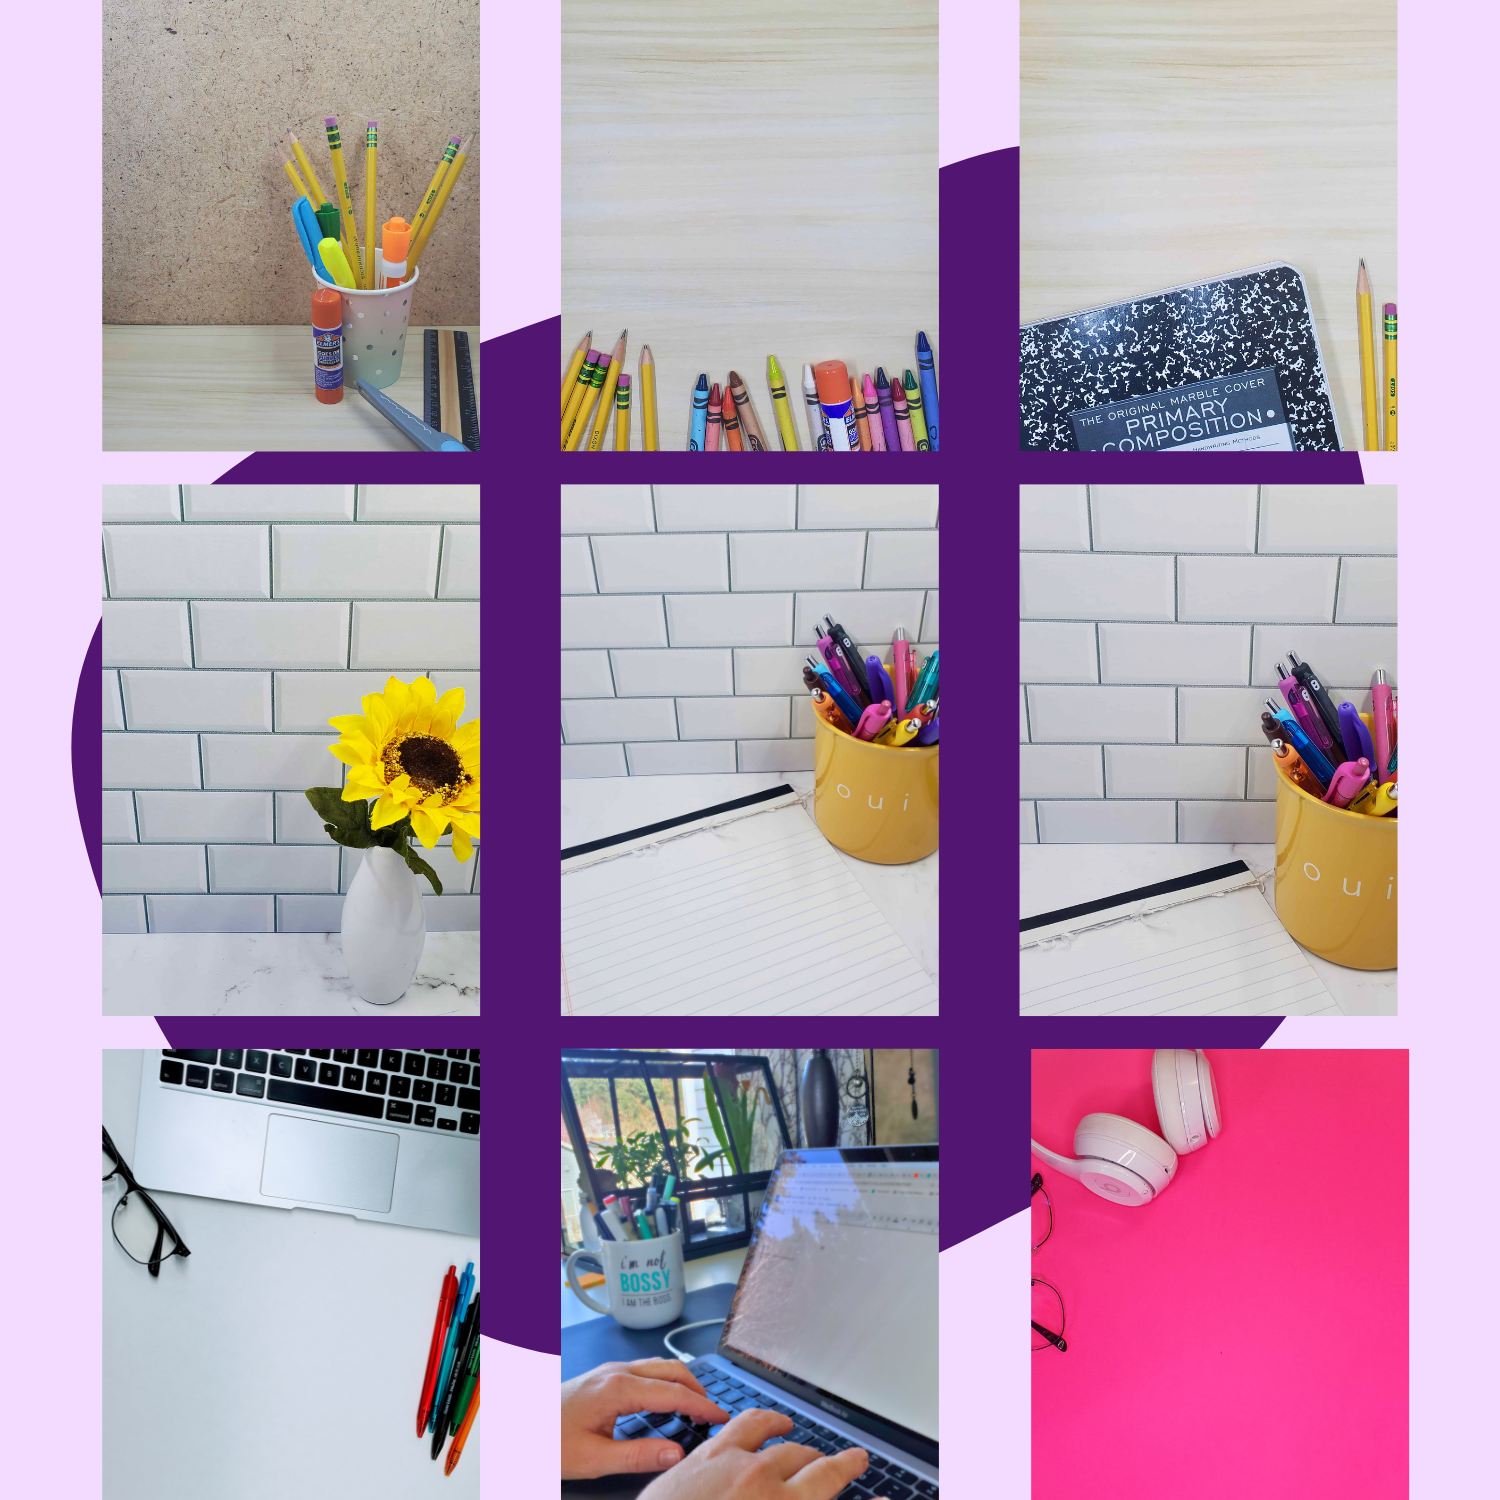 Stock Photos for Bloggers Bundle (set of 100)